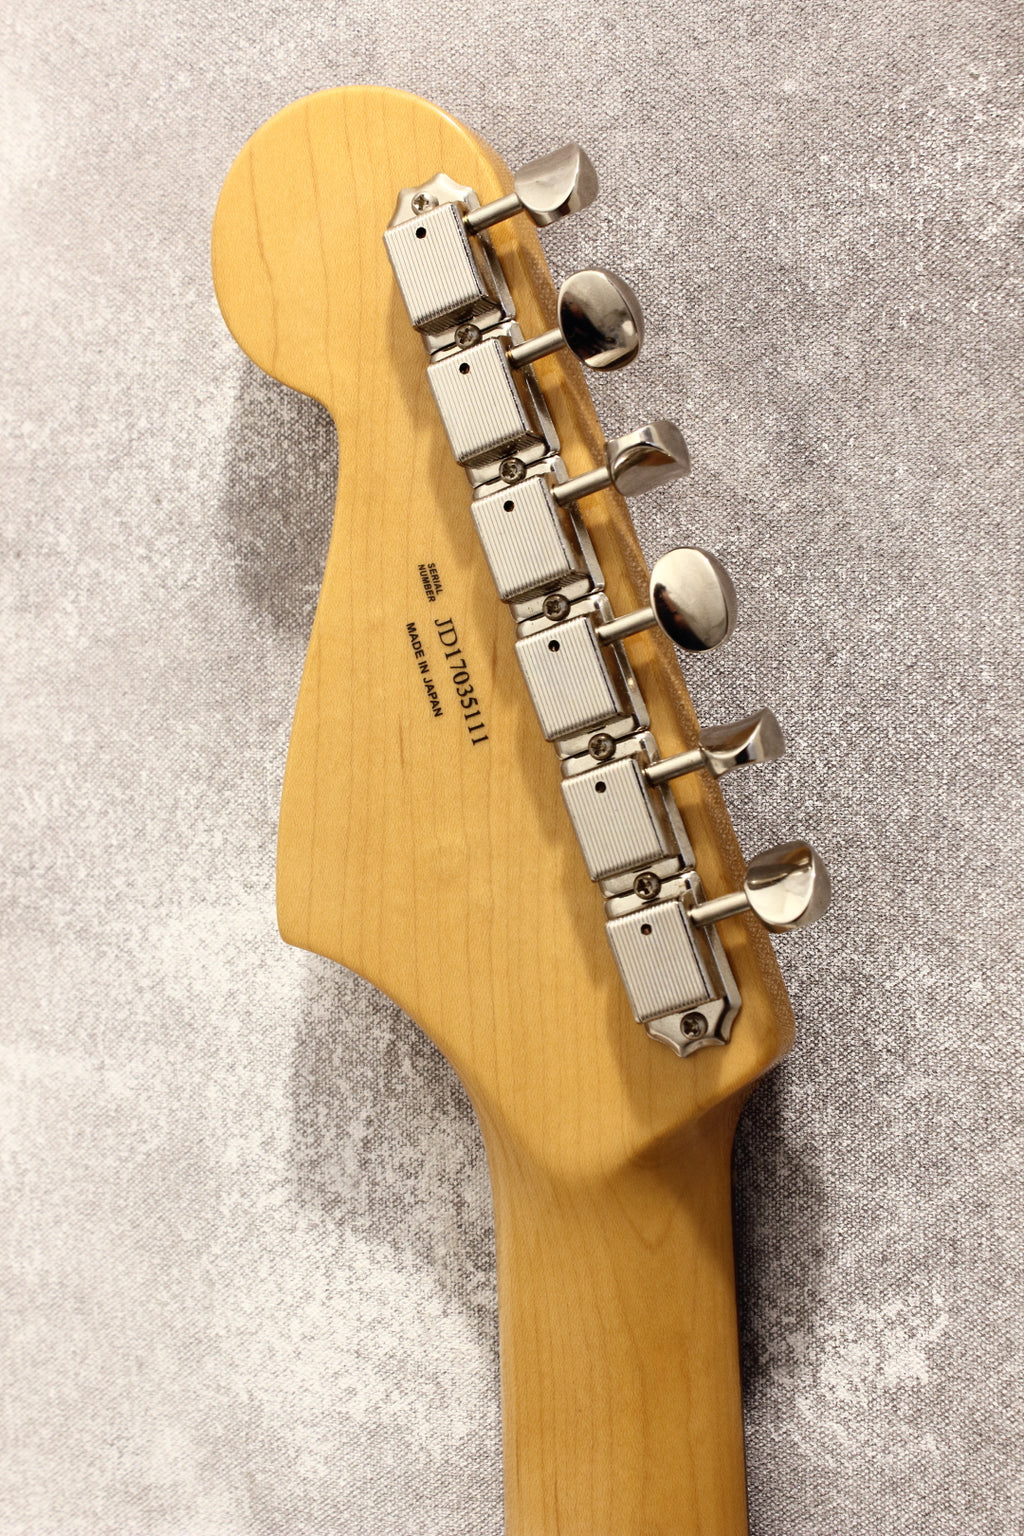 Fender Made In Japan Classic 60s Jazzmaster Vintage White 2017